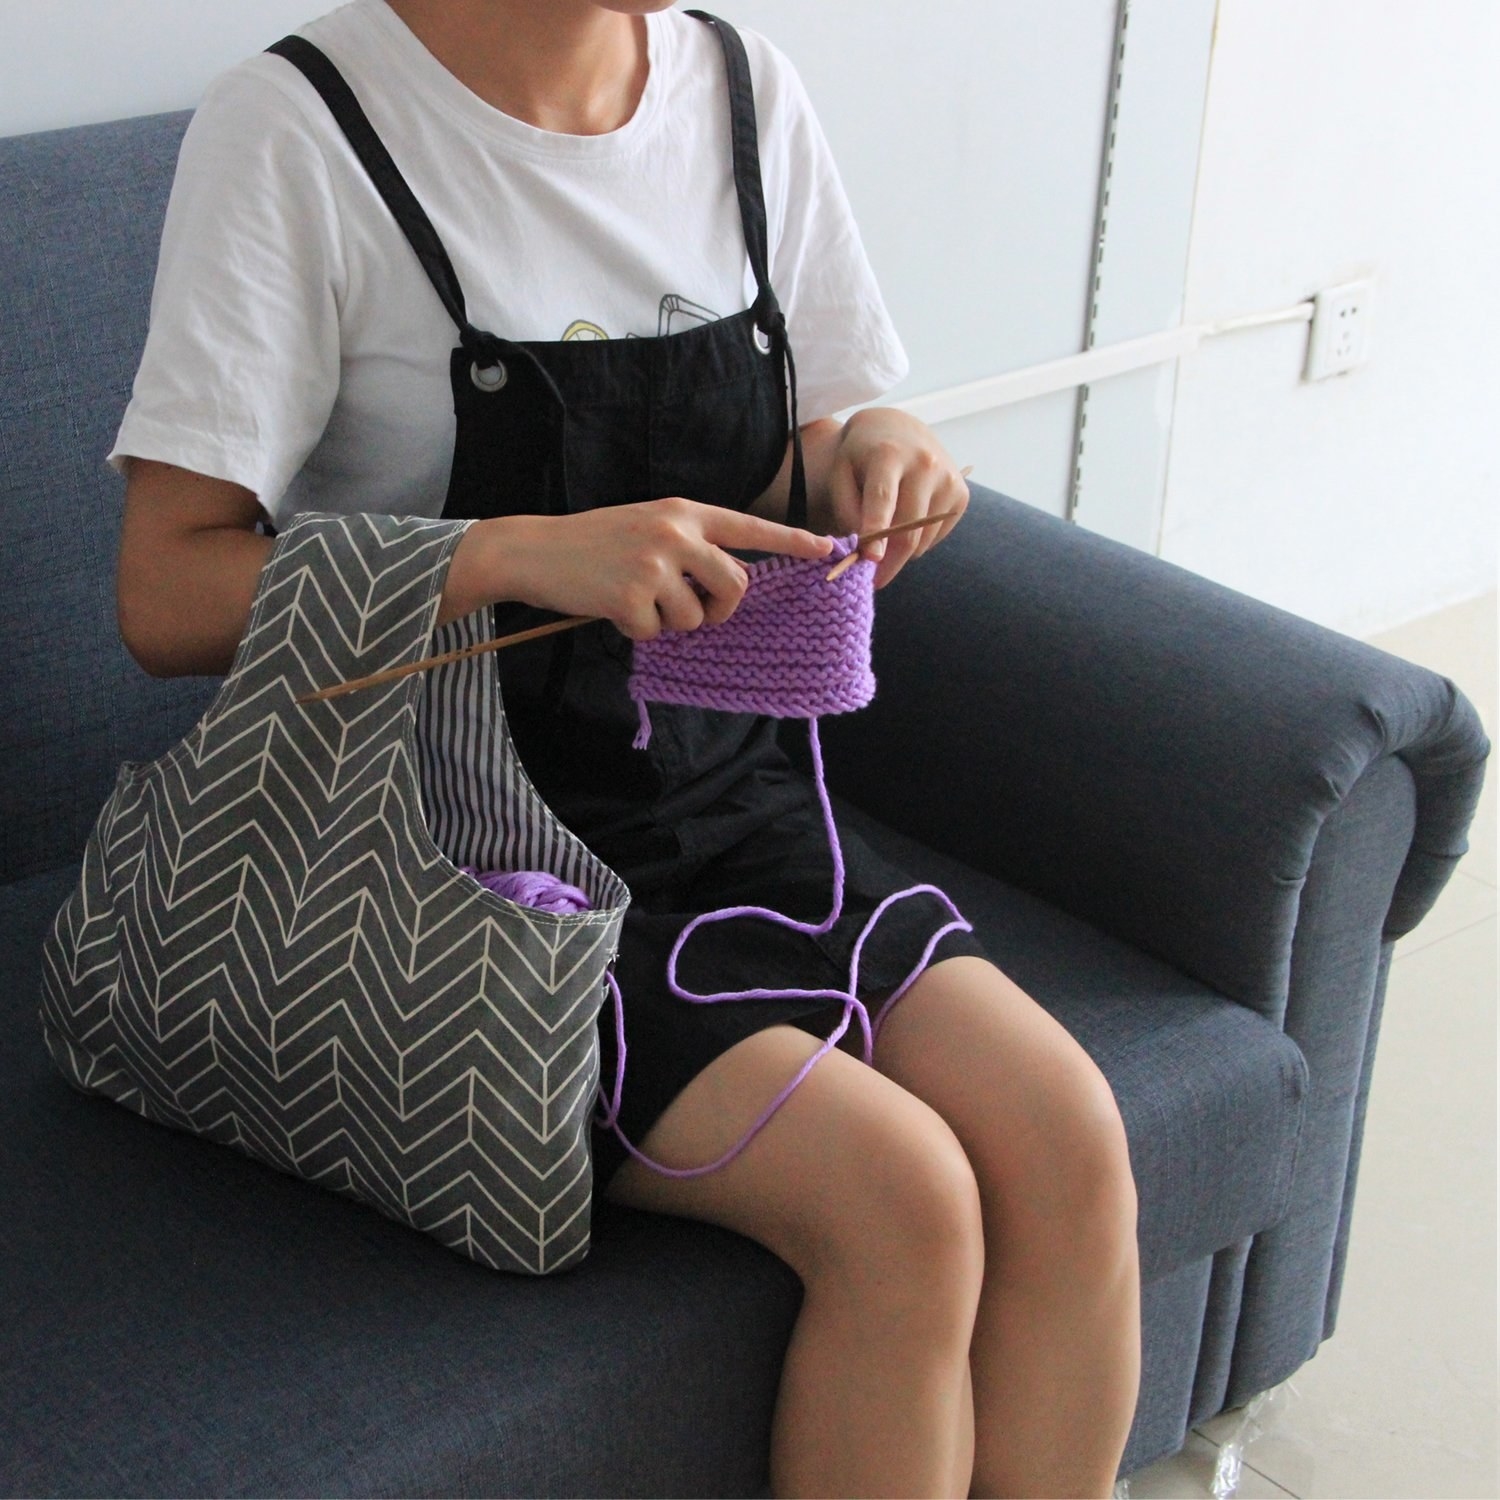 A person knitting with the bag next to them